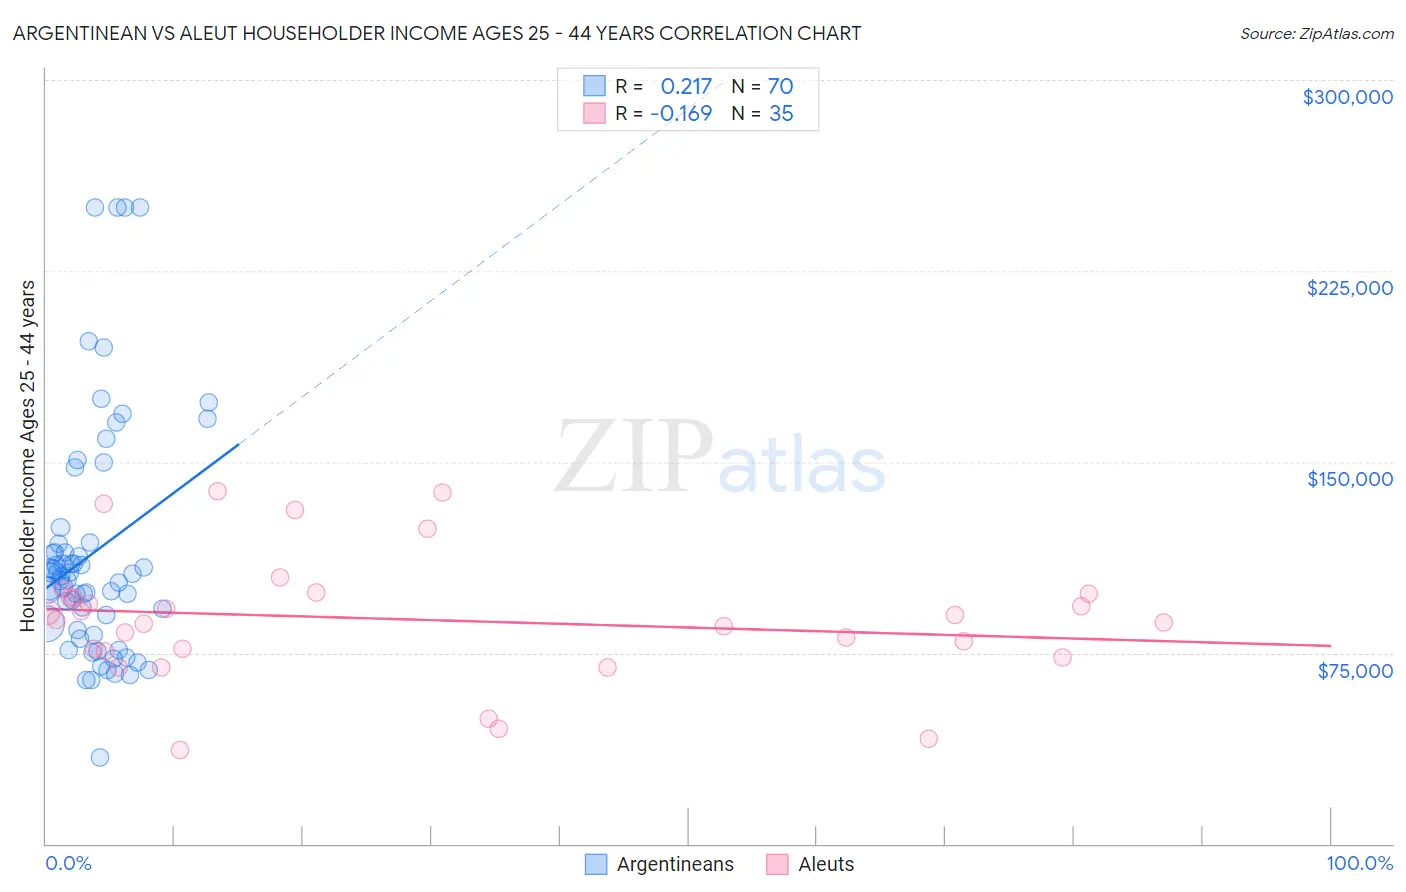 Argentinean vs Aleut Householder Income Ages 25 - 44 years